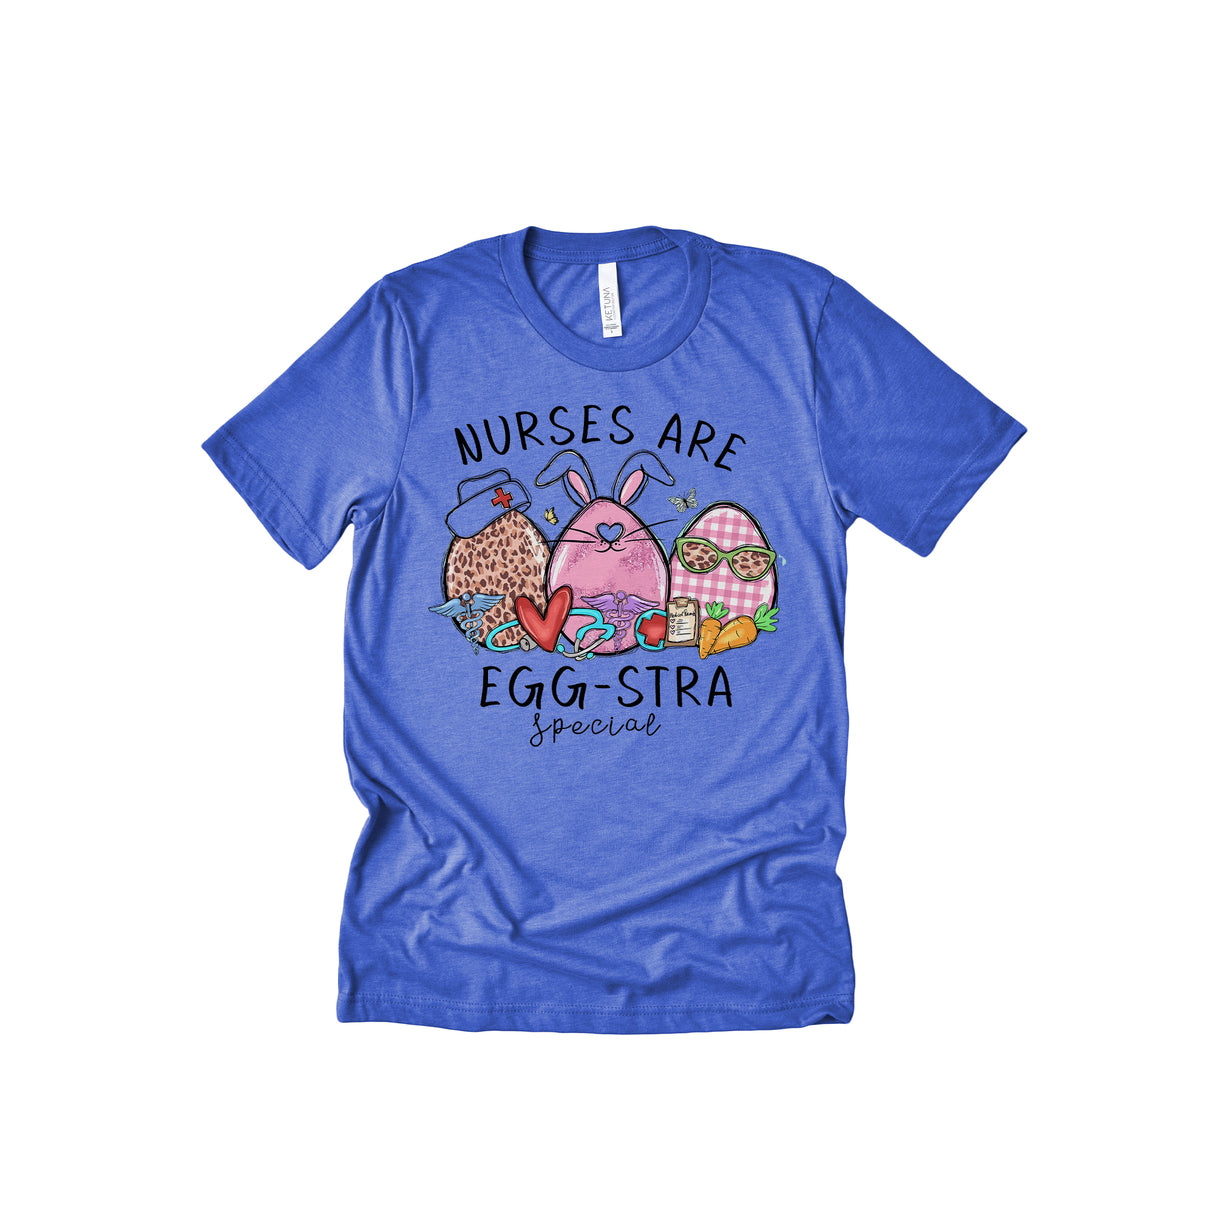 Nurses Are Egg-stra Special Unisex Adult T-Shirt